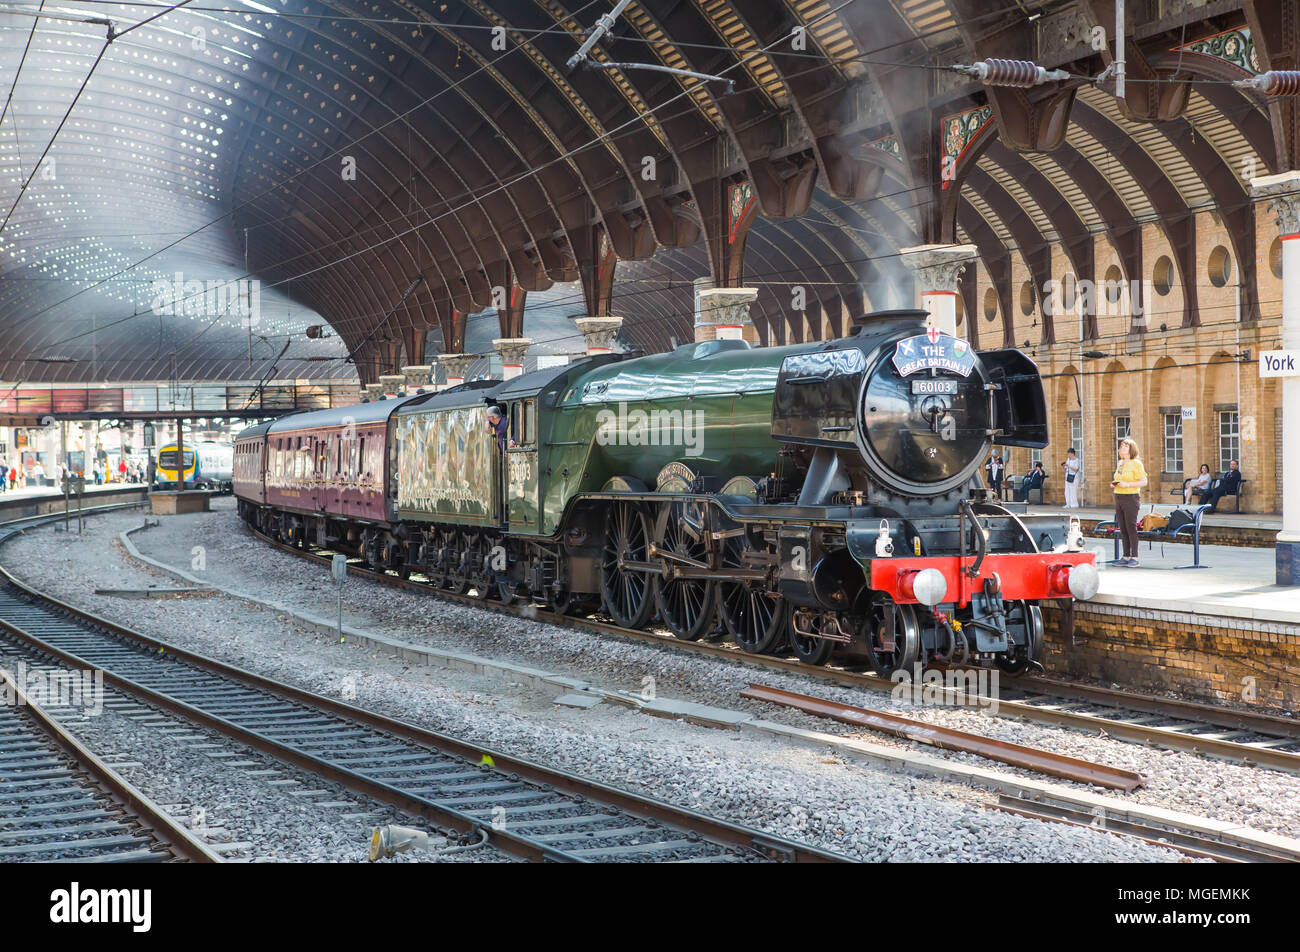 The famous A3 Pacific steam locomotive 60103 Flying Scotsman in its British Railways livery at York Station. Stock Photo